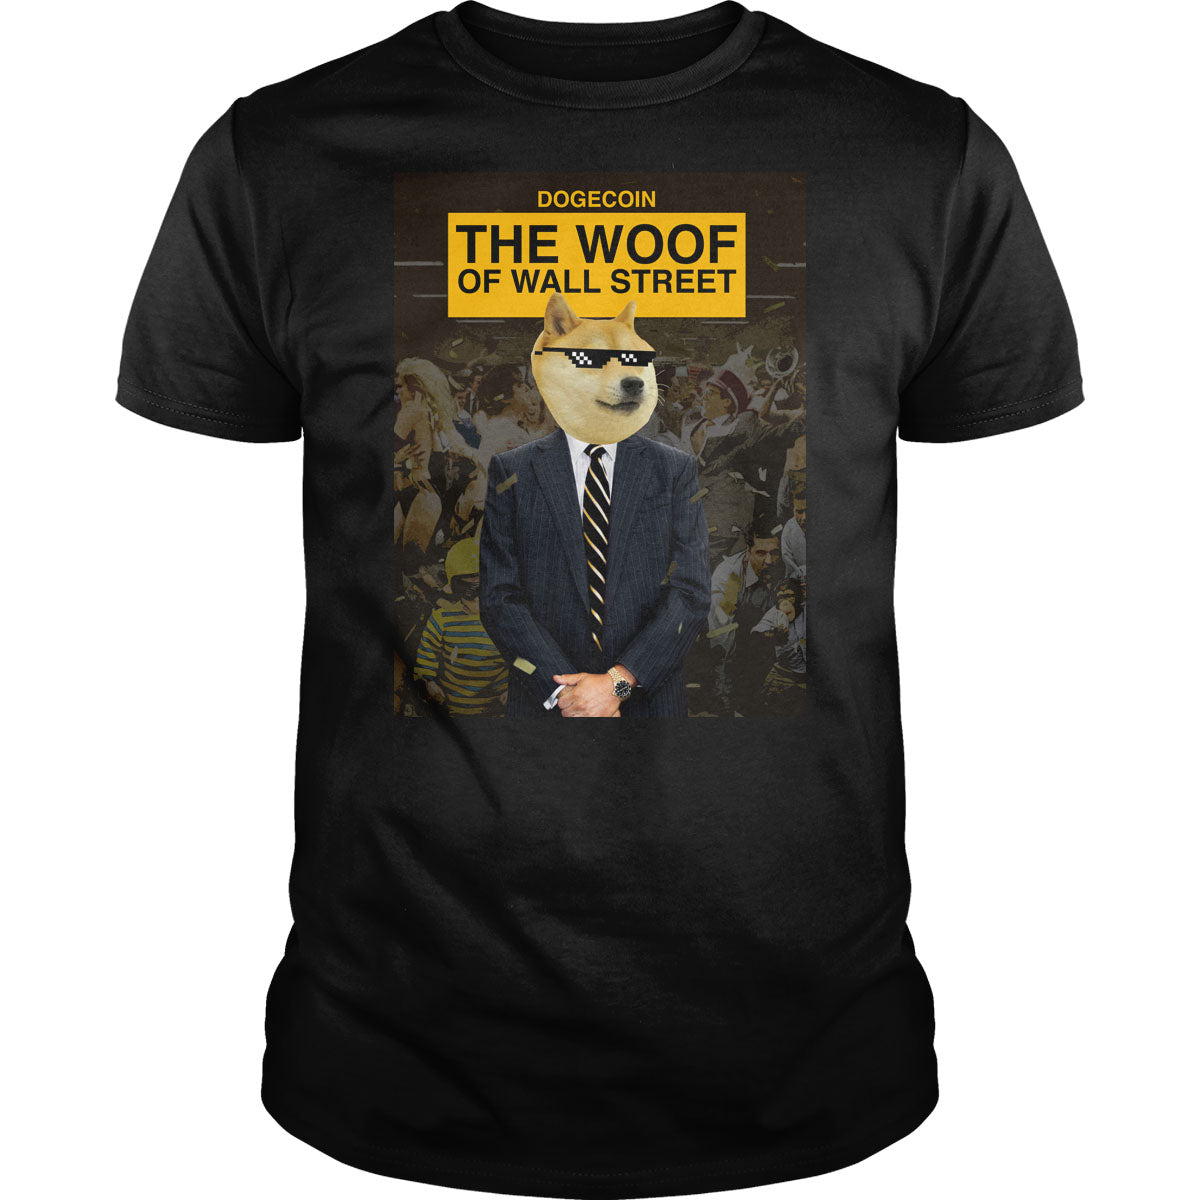 The Woof Of Wall Street - BustedTees.com